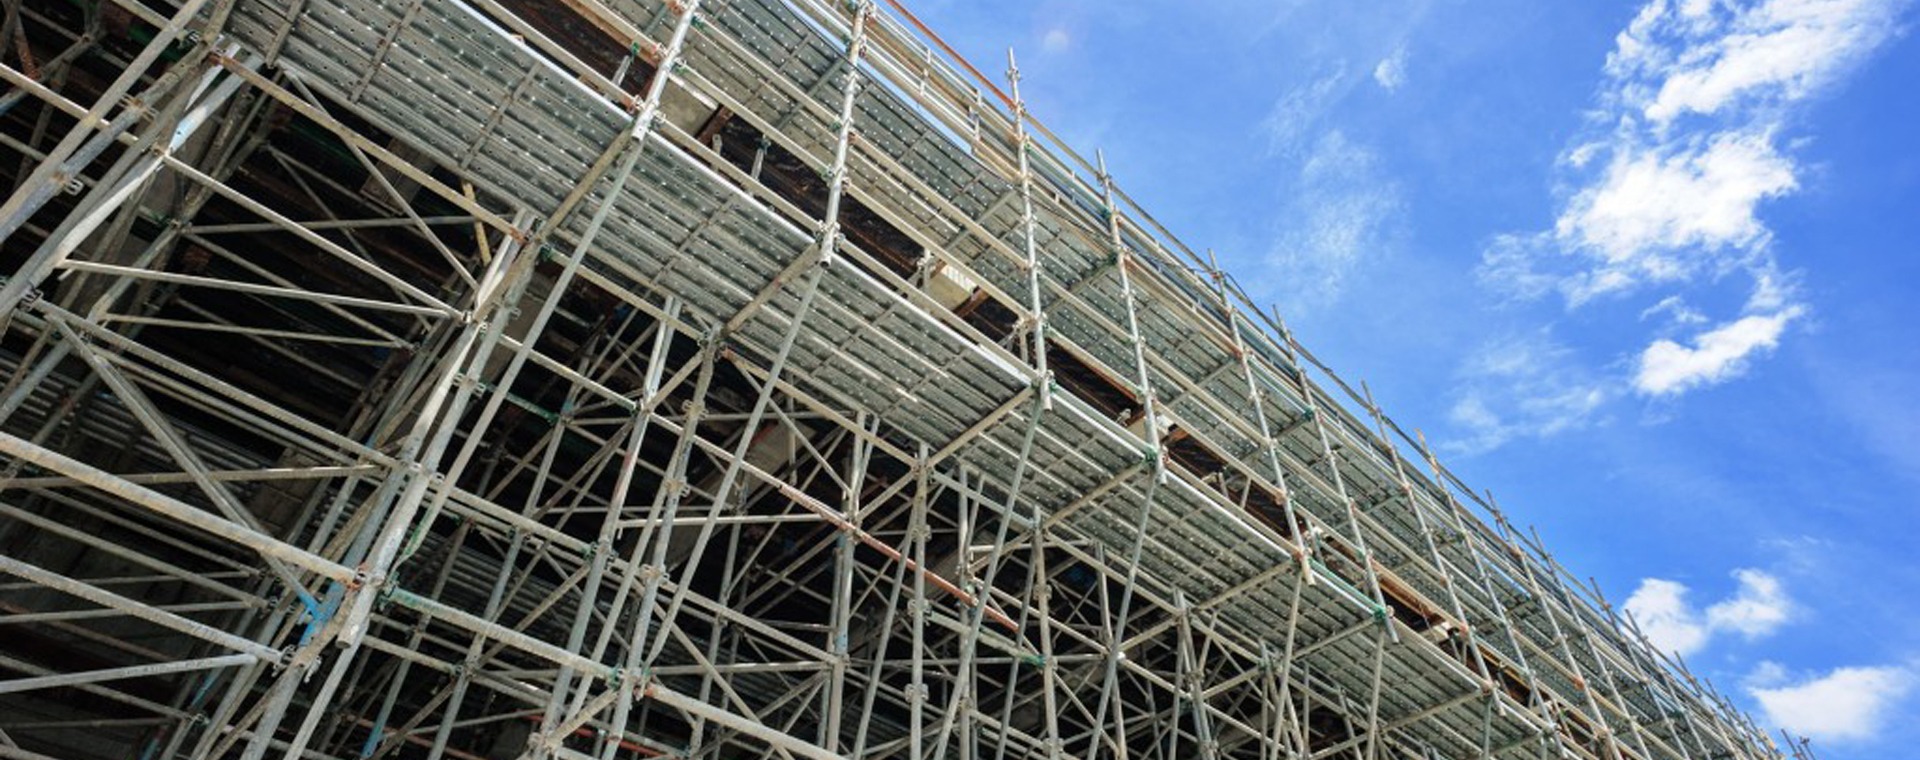 About us,Domestic Scaffolding Services